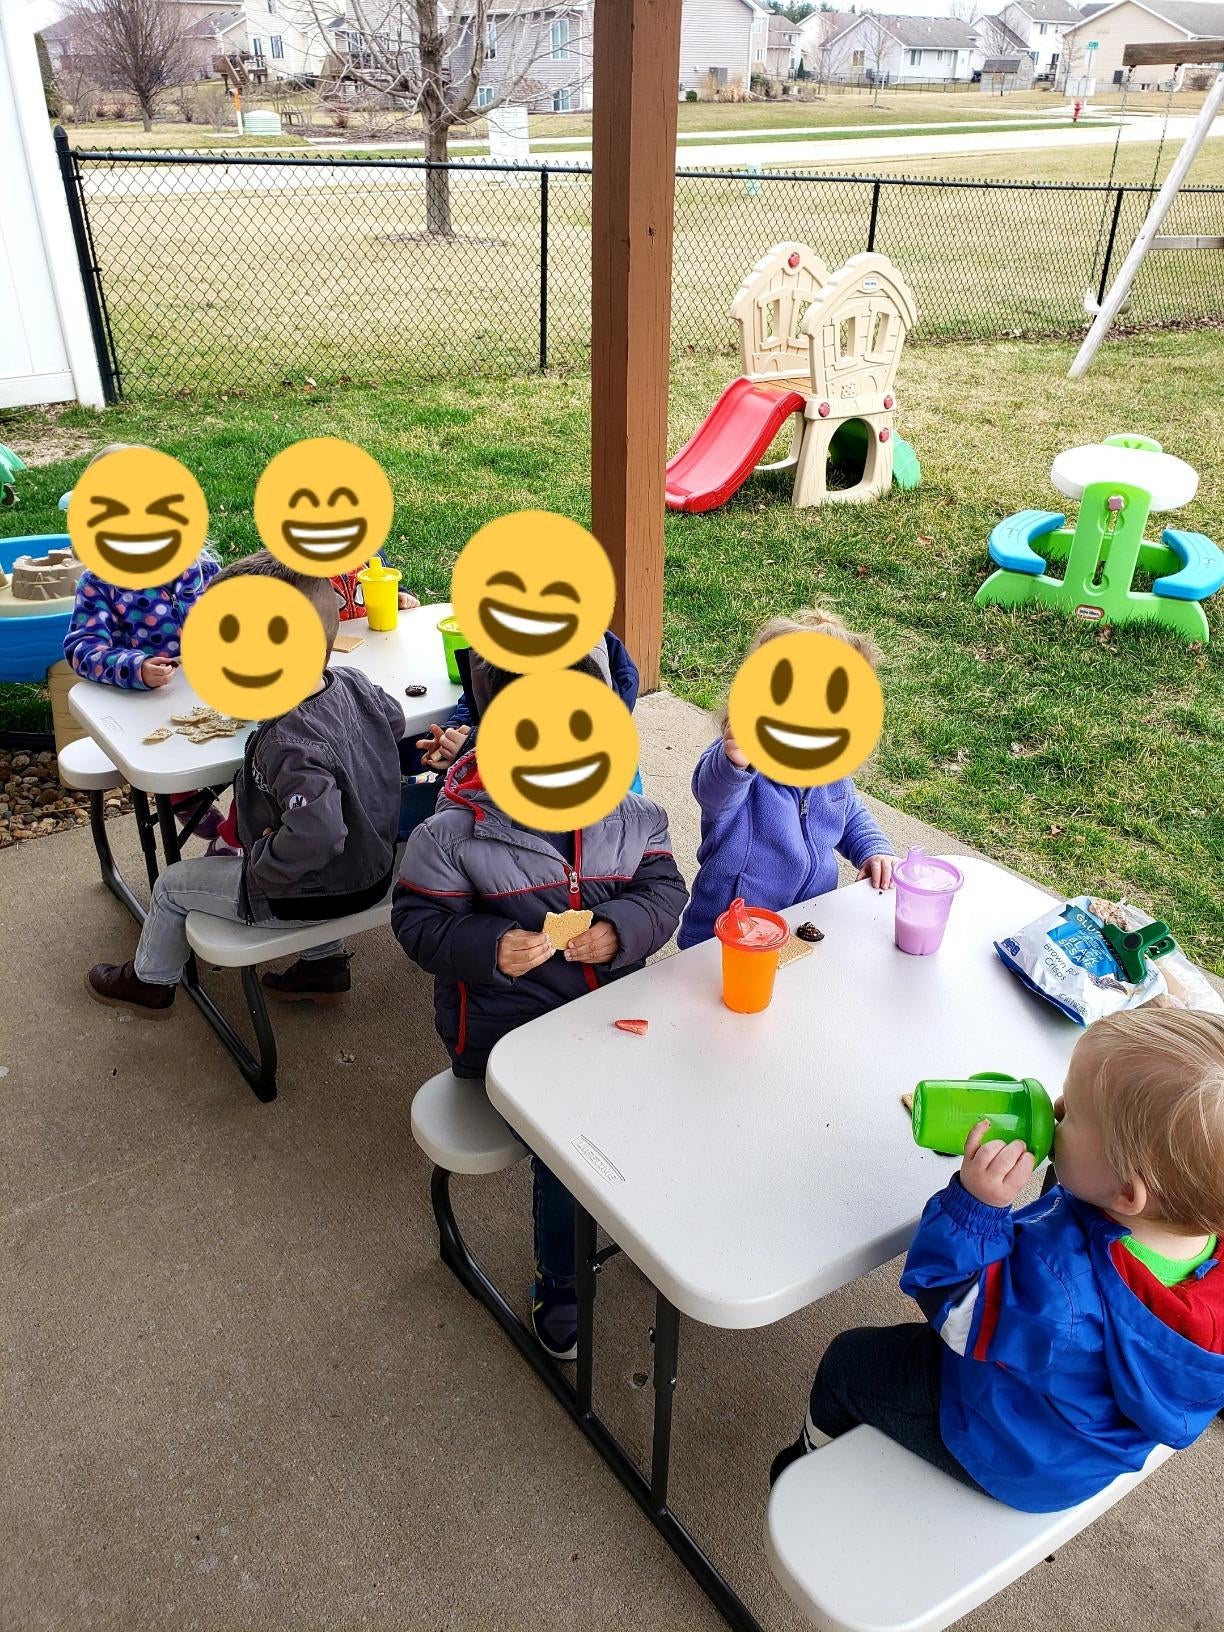 a review photo of kids sitting at the picnic tables outdoors